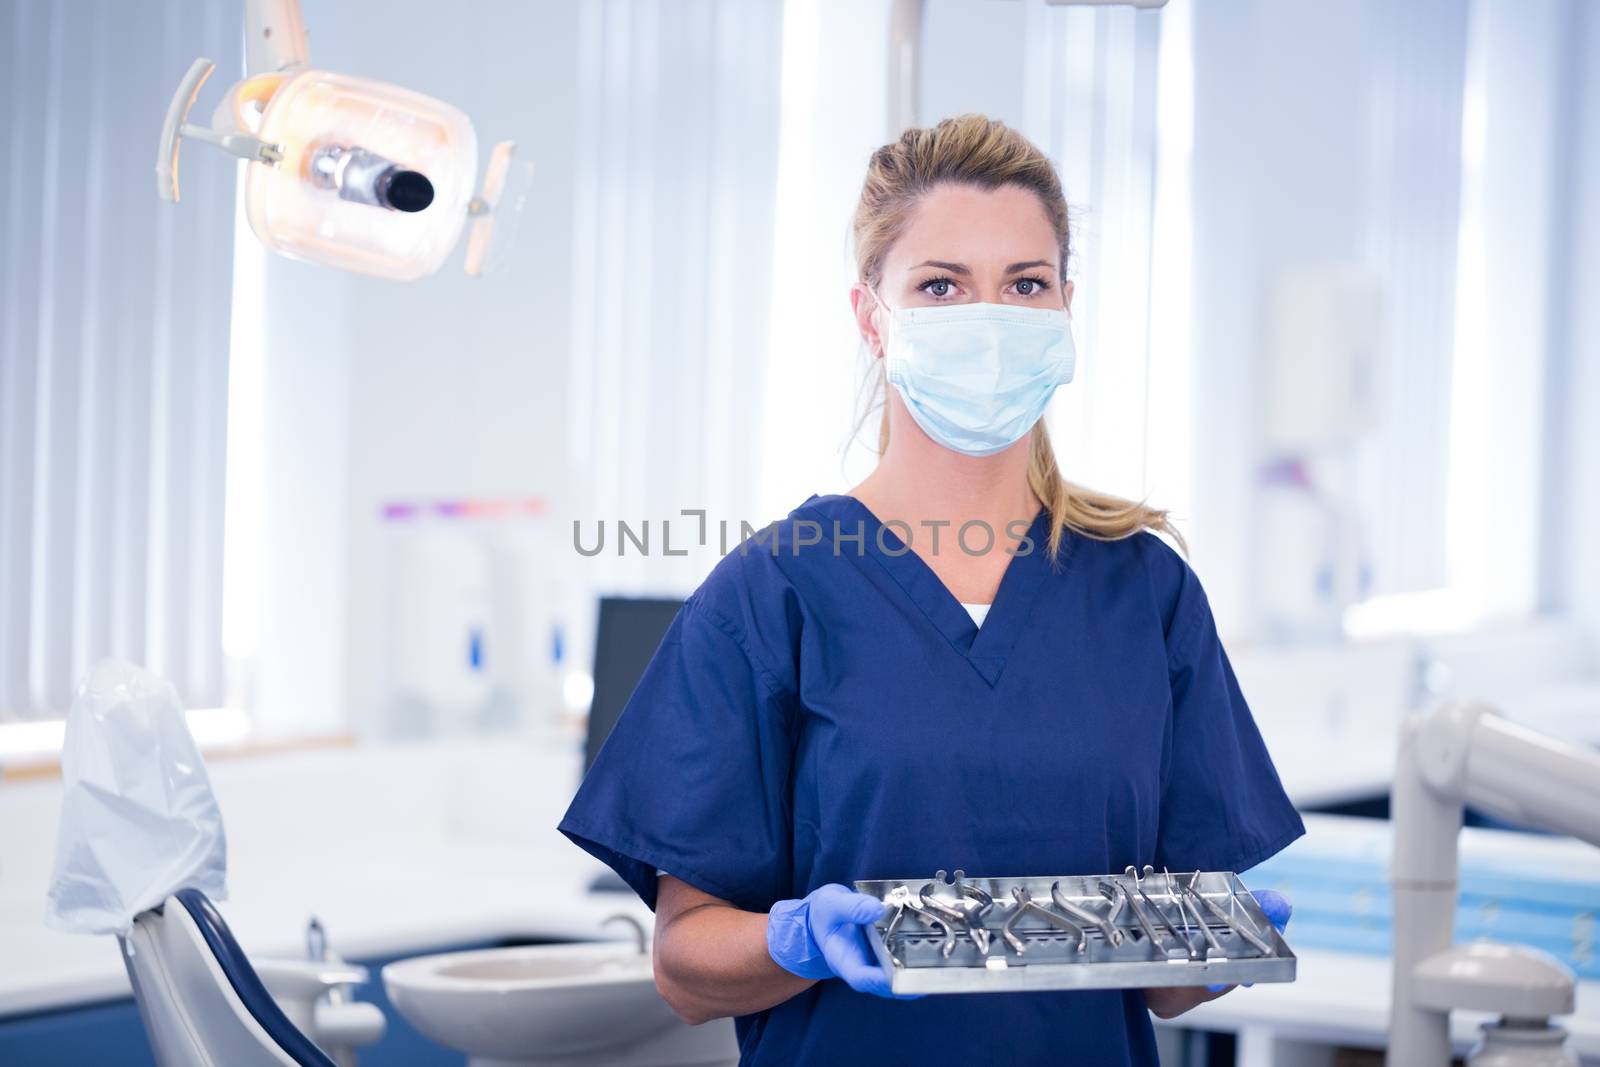 Dentist in mask holding tray of tools by Wavebreakmedia